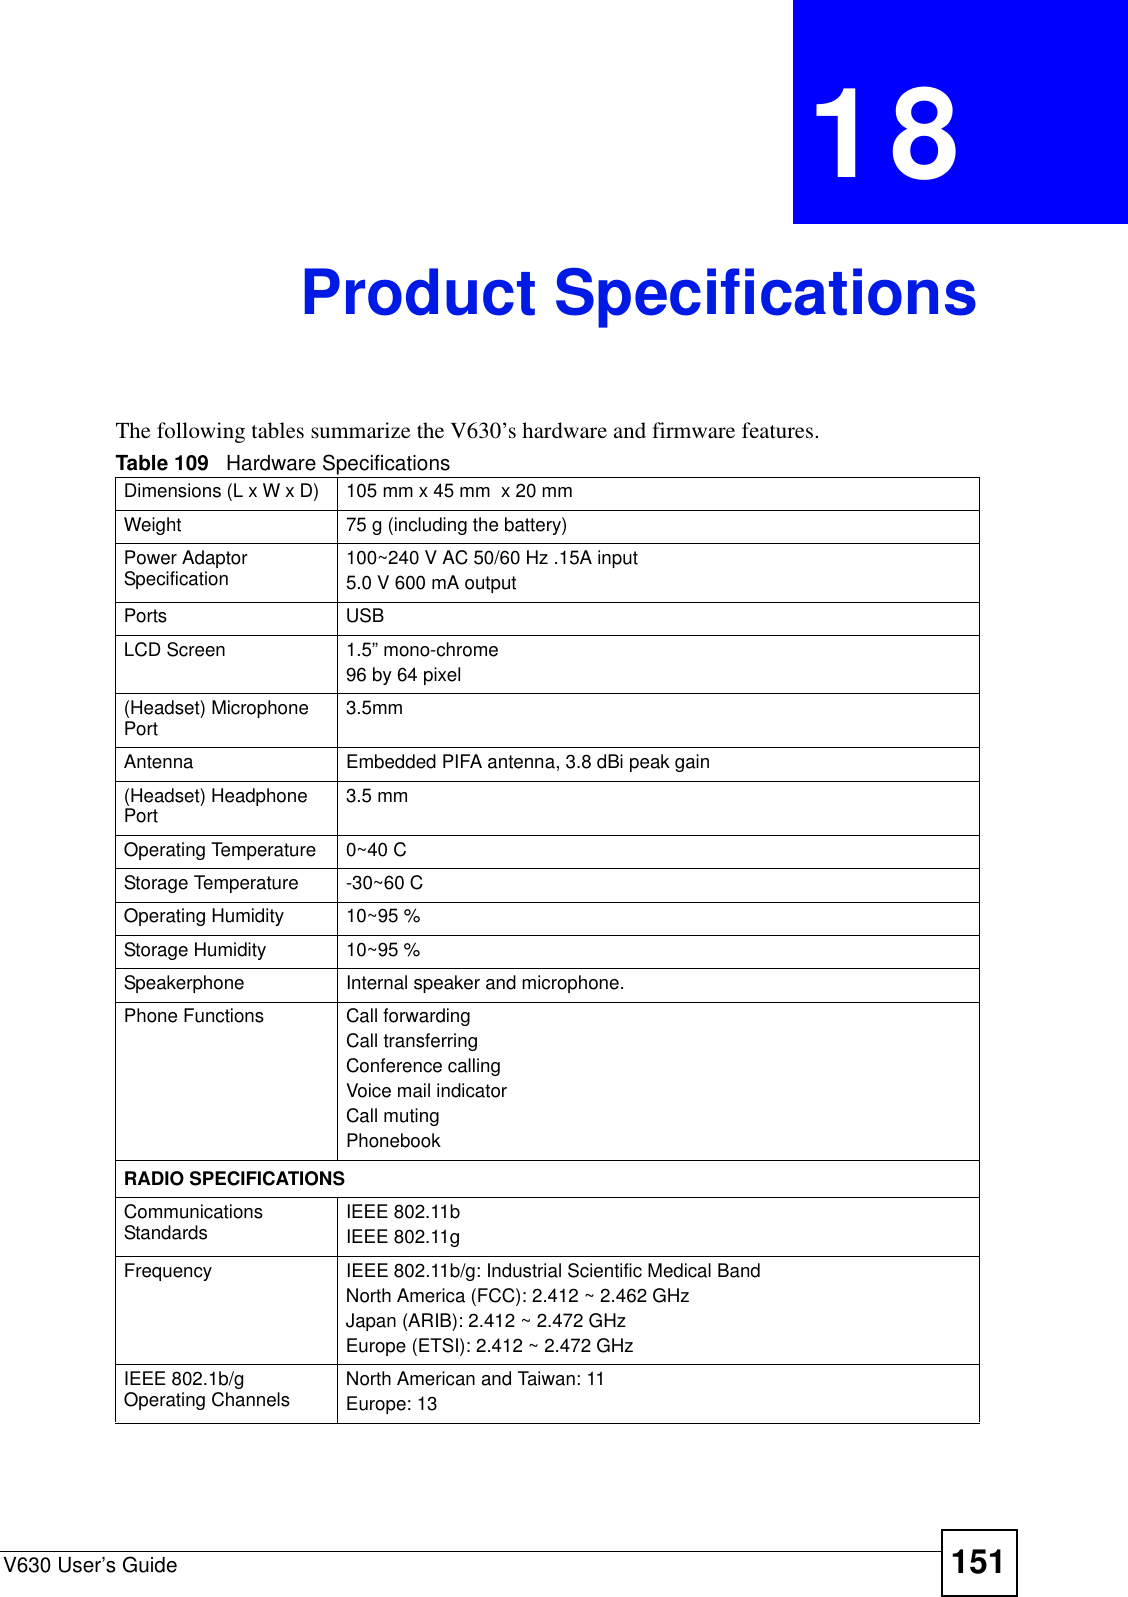 V630 User’s Guide 151CHAPTER  18 Product SpecificationsThe following tables summarize the V630’s hardware and firmware features.Table 109   Hardware SpecificationsDimensions (L x W x D)   105 mm x 45 mm  x 20 mmWeight 75 g (including the battery)Power Adaptor Specification 100~240 V AC 50/60 Hz .15A input5.0 V 600 mA outputPorts USB LCD Screen 1.5” mono-chrome96 by 64 pixel(Headset) Microphone Port 3.5mmAntenna Embedded PIFA antenna, 3.8 dBi peak gain(Headset) Headphone Port 3.5 mmOperating Temperature 0~40 CStorage Temperature -30~60 COperating Humidity 10~95 % Storage Humidity 10~95 %Speakerphone Internal speaker and microphone.Phone Functions Call forwardingCall transferringConference callingVoice mail indicatorCall mutingPhonebookRADIO SPECIFICATIONSCommunications Standards IEEE 802.11bIEEE 802.11gFrequency IEEE 802.11b/g: Industrial Scientific Medical BandNorth America (FCC): 2.412 ~ 2.462 GHz Japan (ARIB): 2.412 ~ 2.472 GHz Europe (ETSI): 2.412 ~ 2.472 GHz IEEE 802.1b/g Operating Channels North American and Taiwan: 11Europe: 13